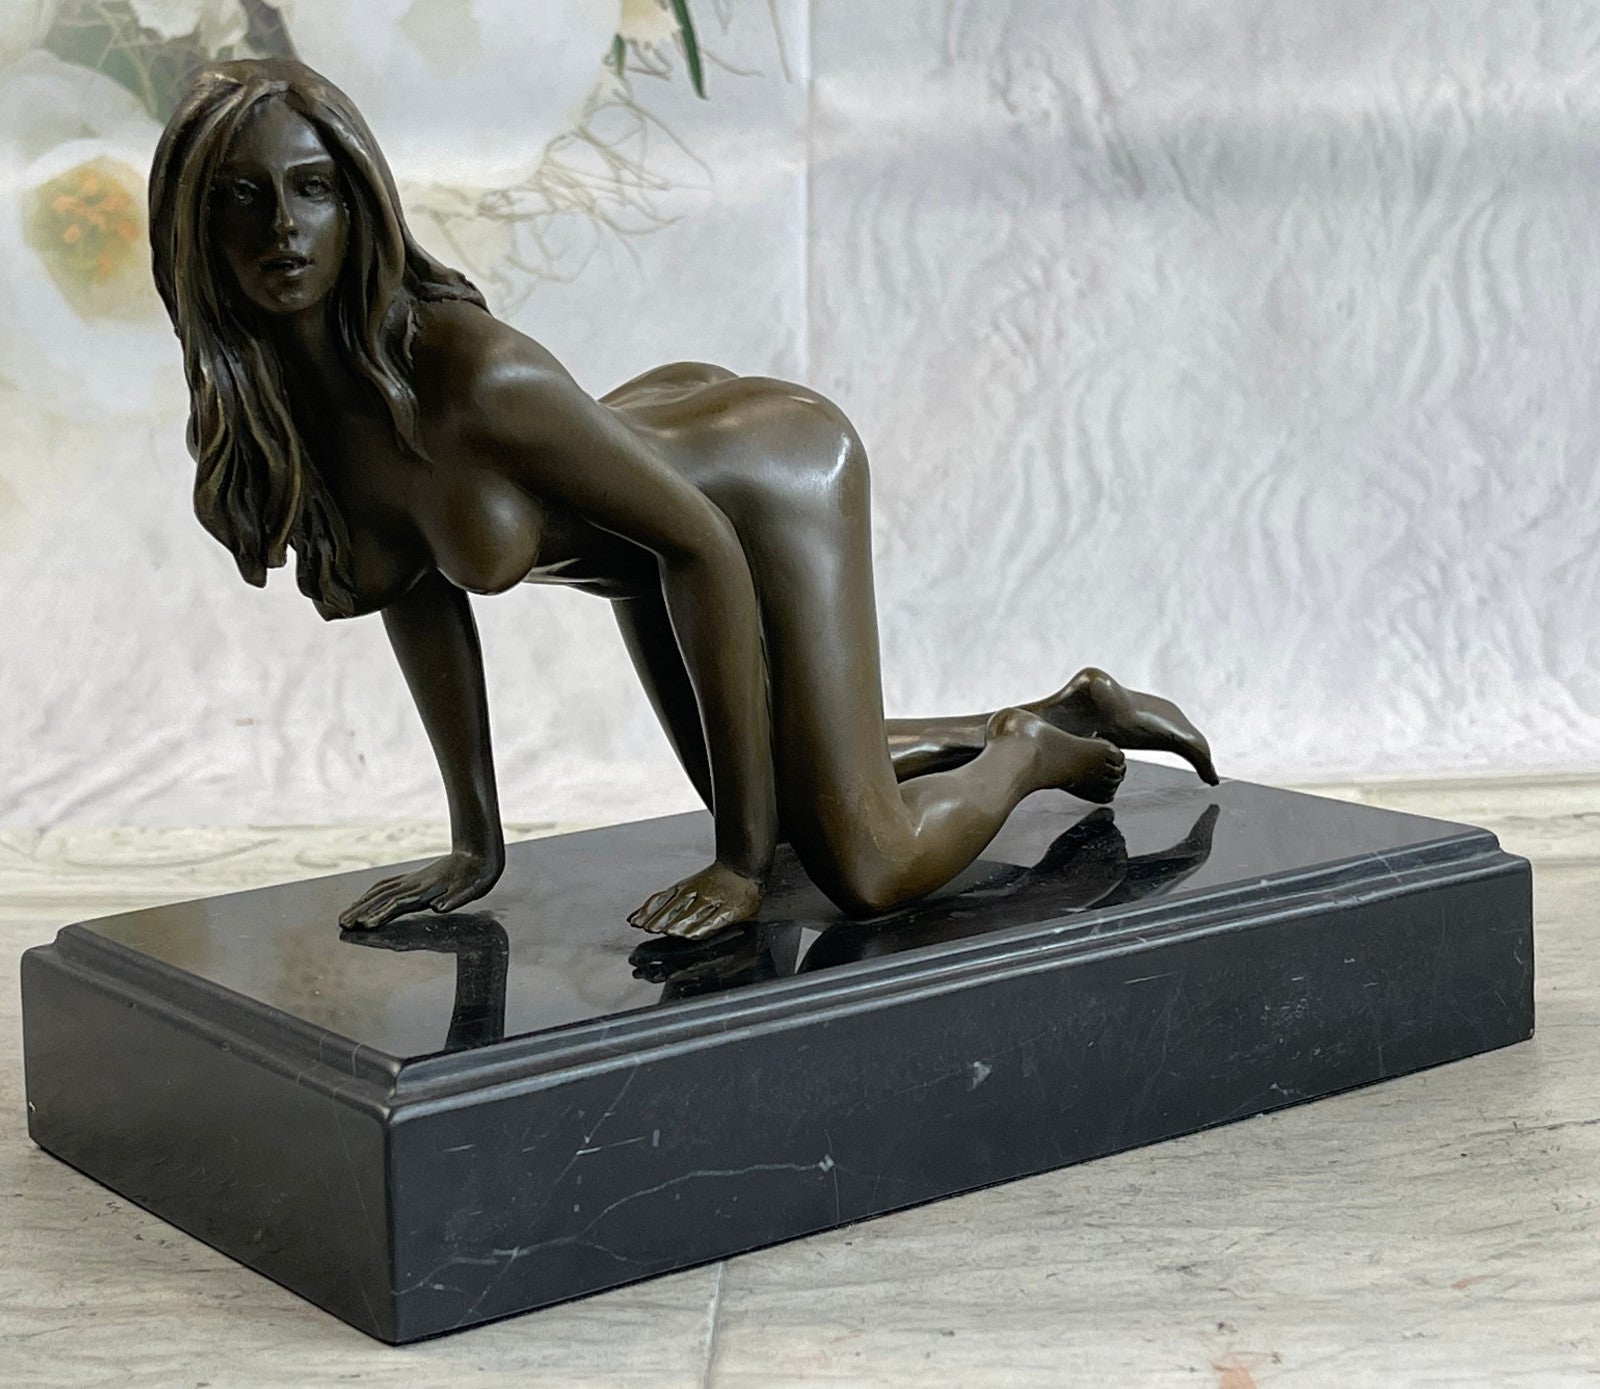 Abstract Modern Art Highly Erotic Conversation starter Sexual Nude Bronze Statue